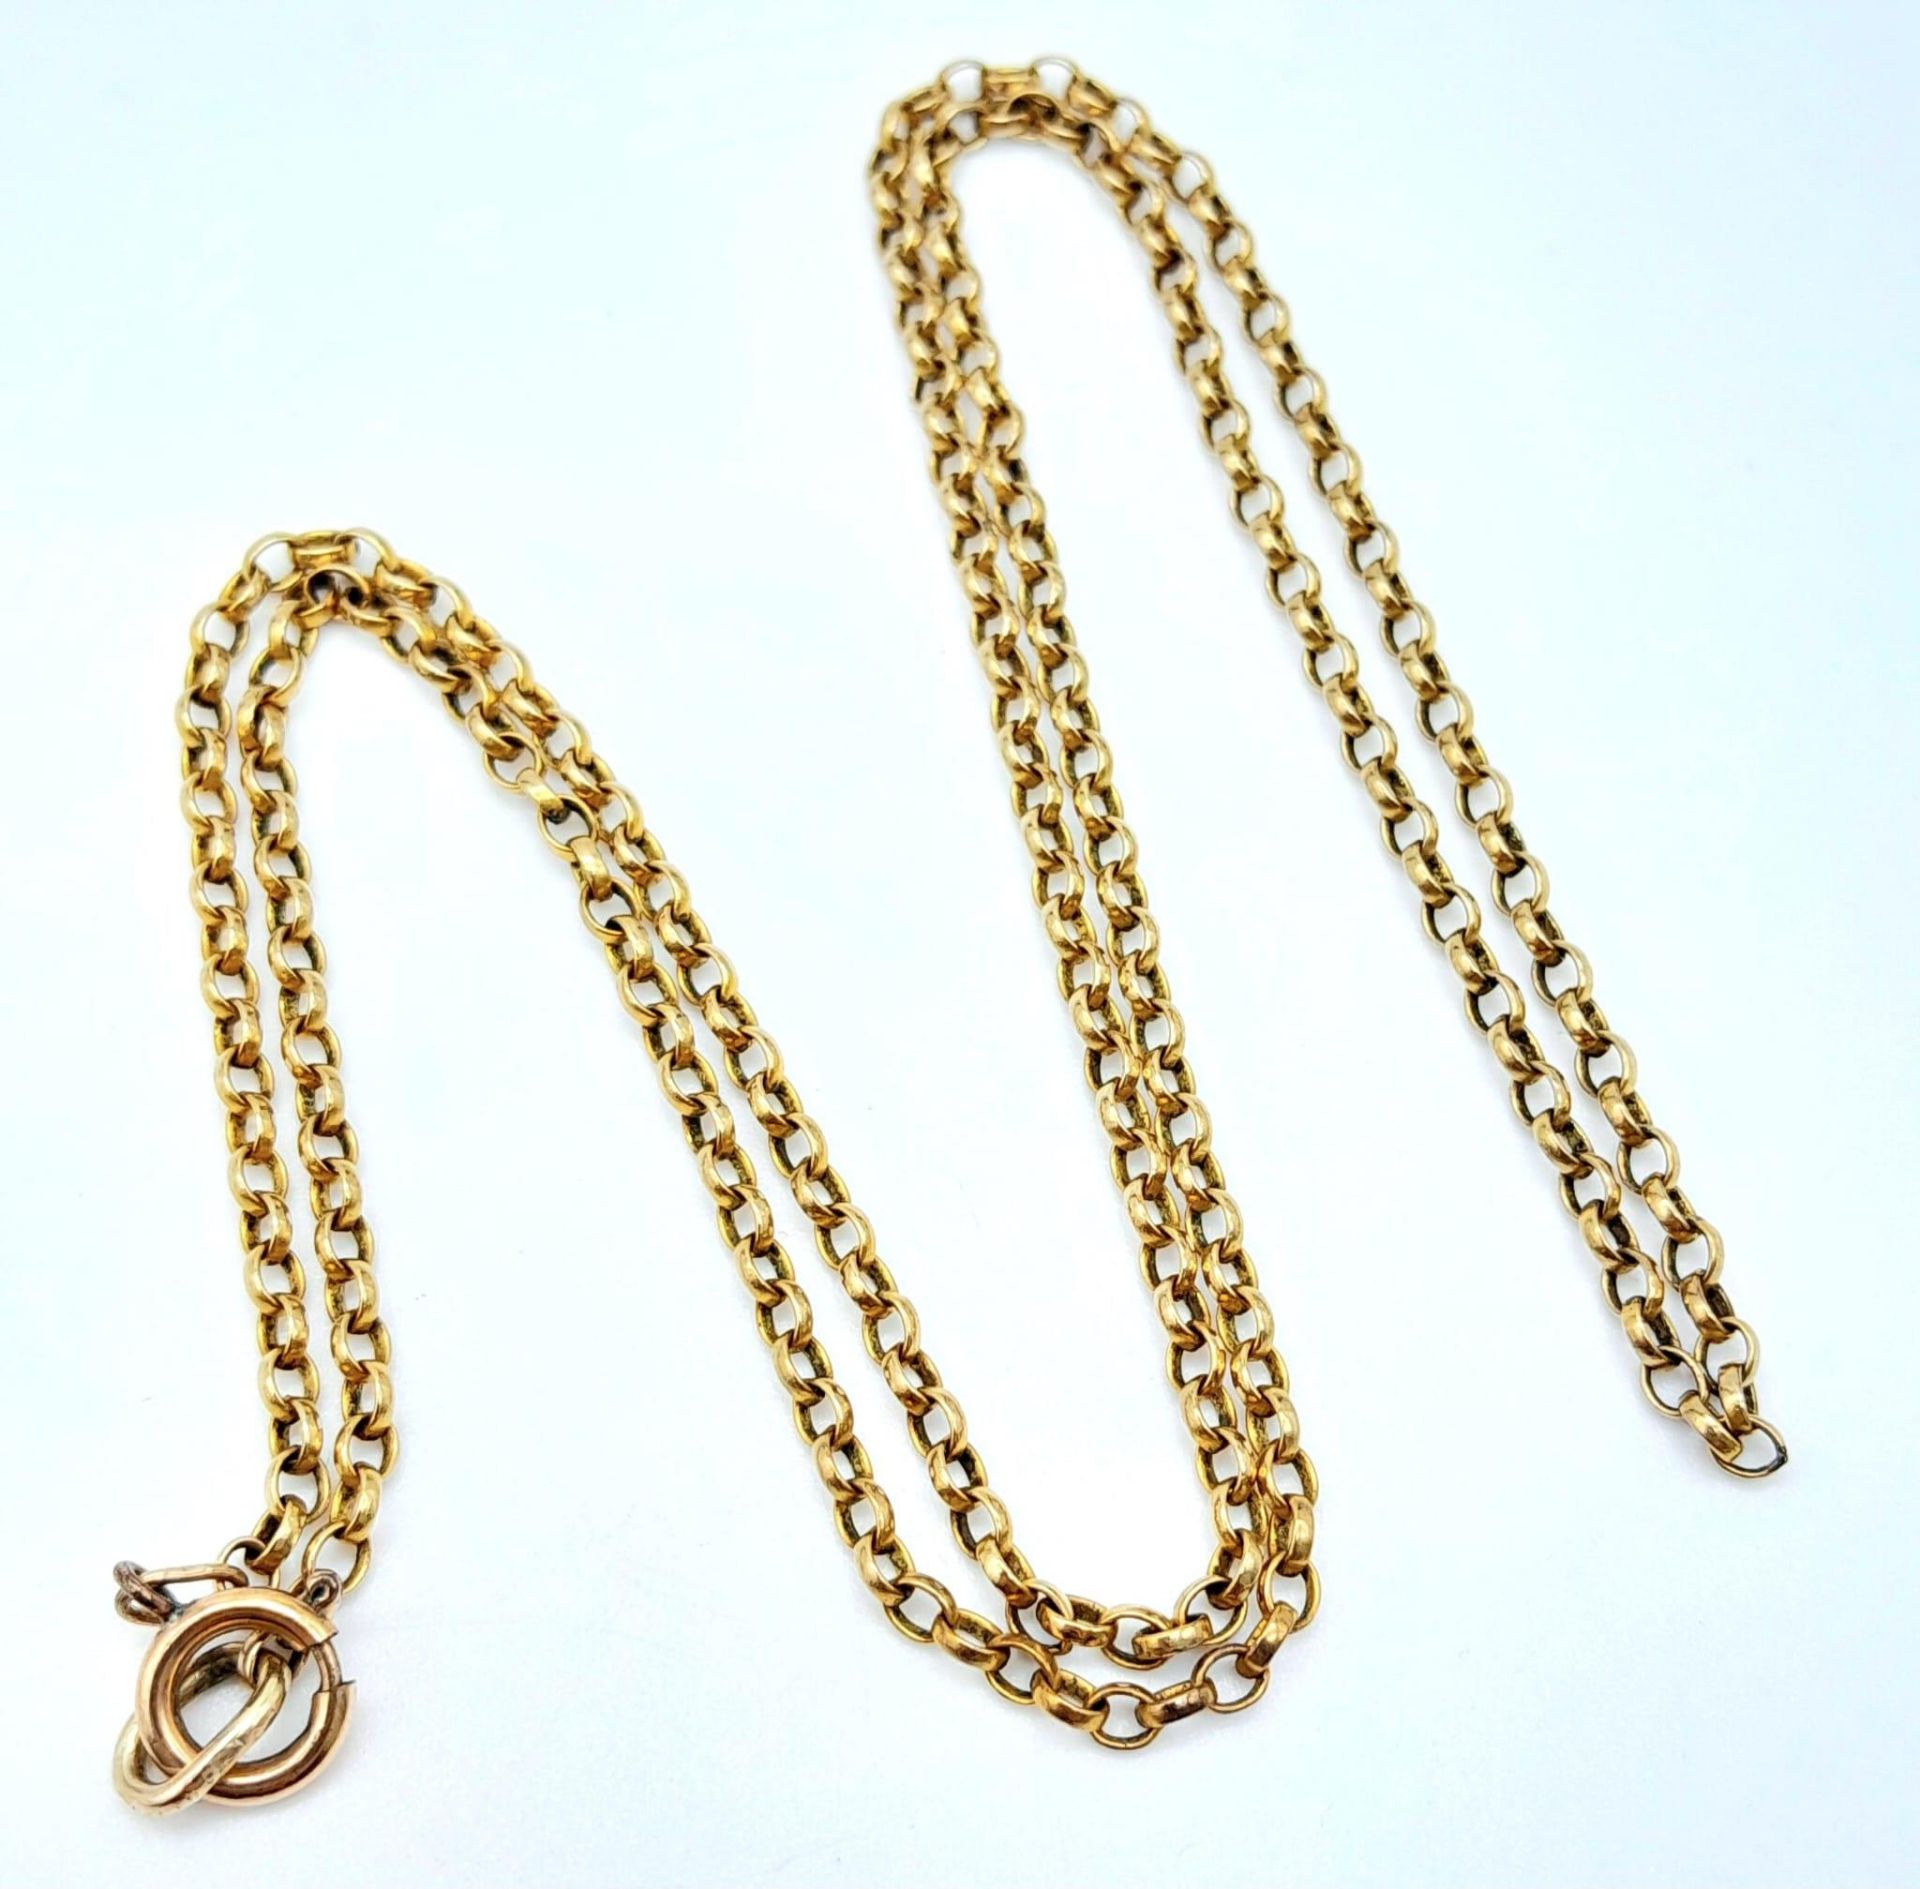 A 9 K yellow gold chain necklace, length: 56 cm, weight: 7.2 g. - Image 3 of 4